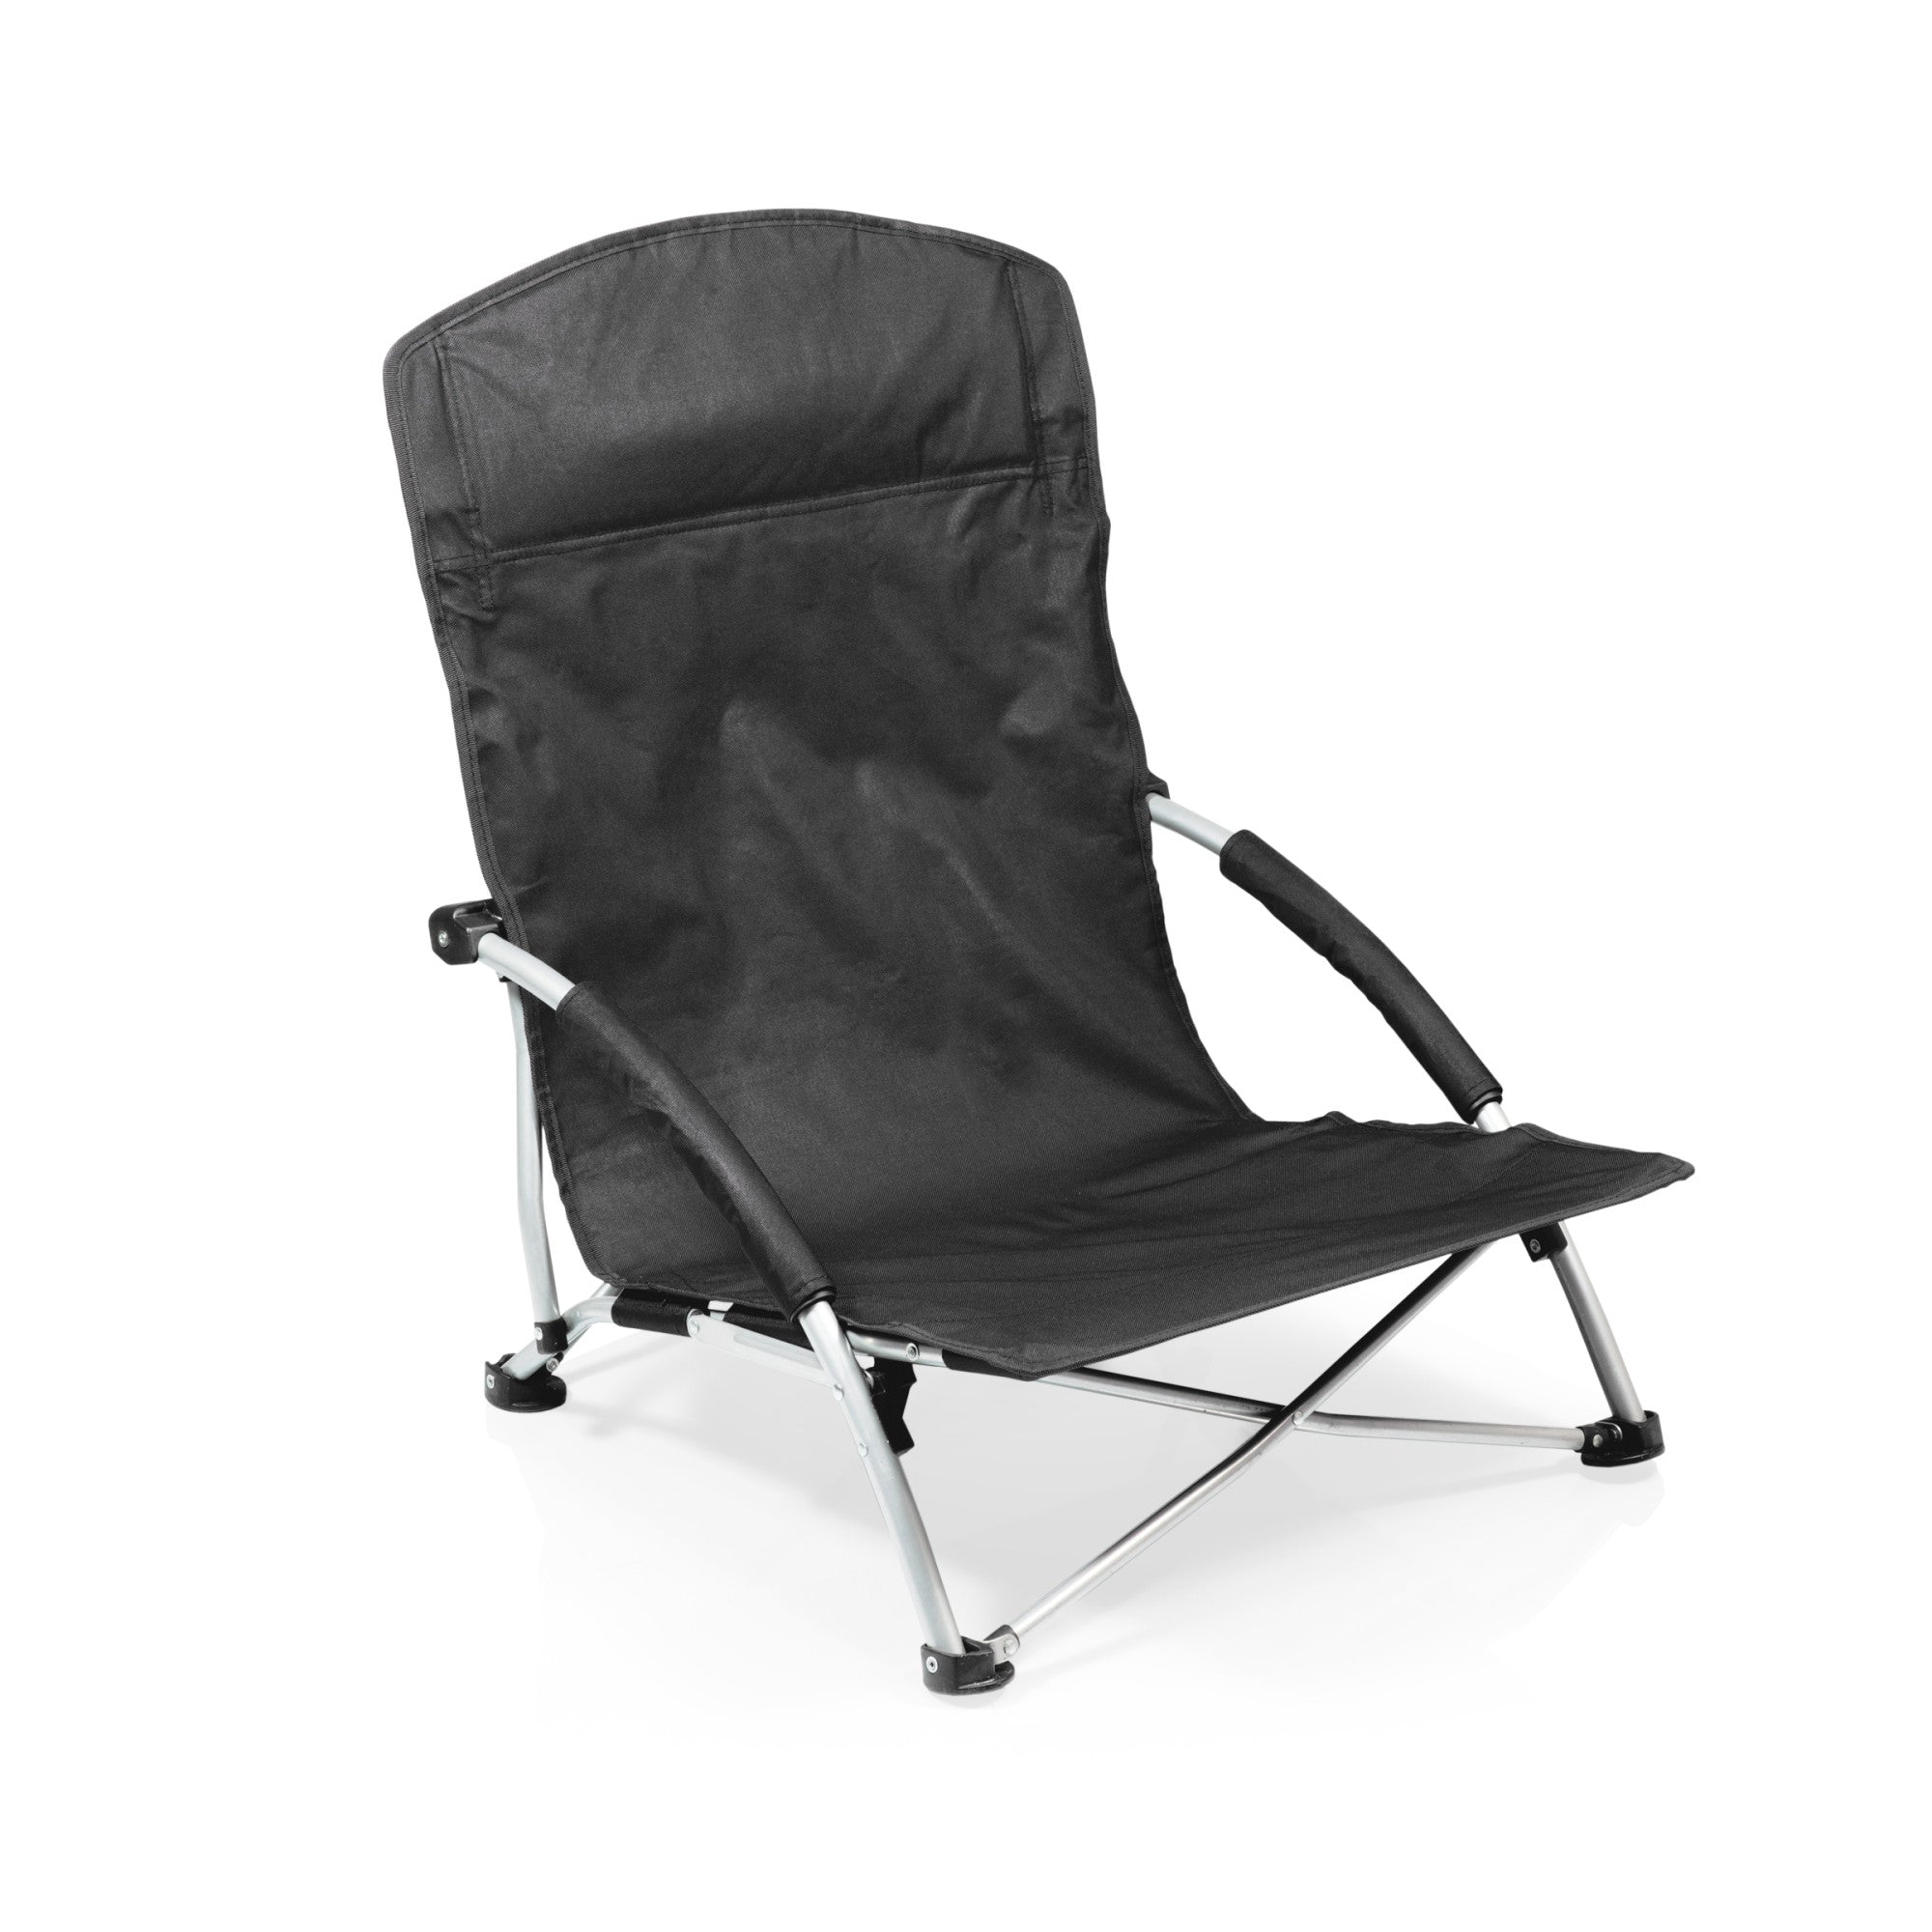 Oakland Athletics - Tranquility Beach Chair with Carry Bag